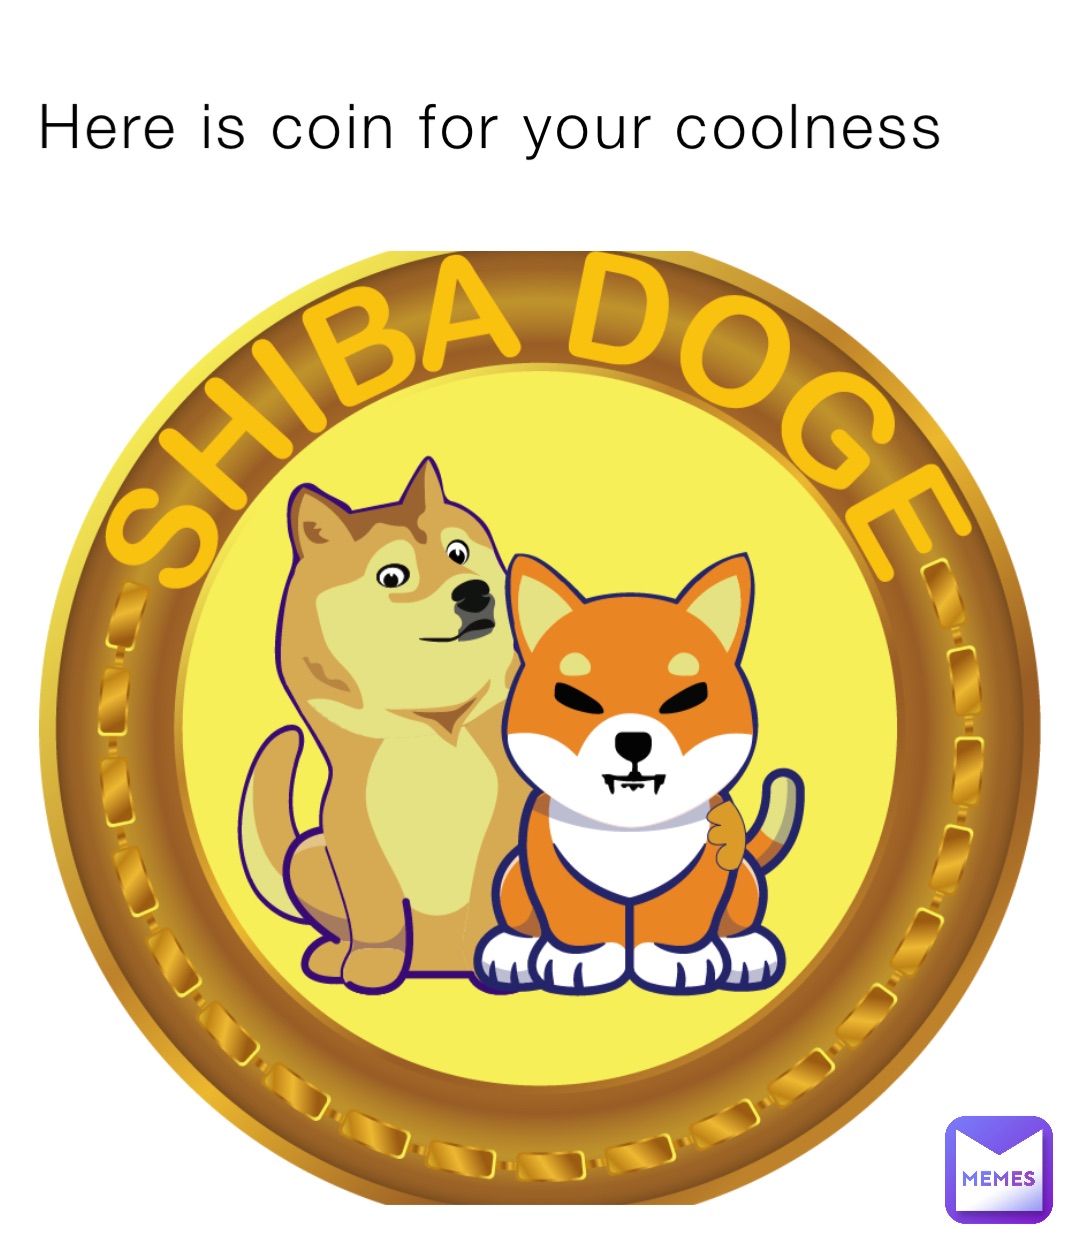 Here is coin for your coolness